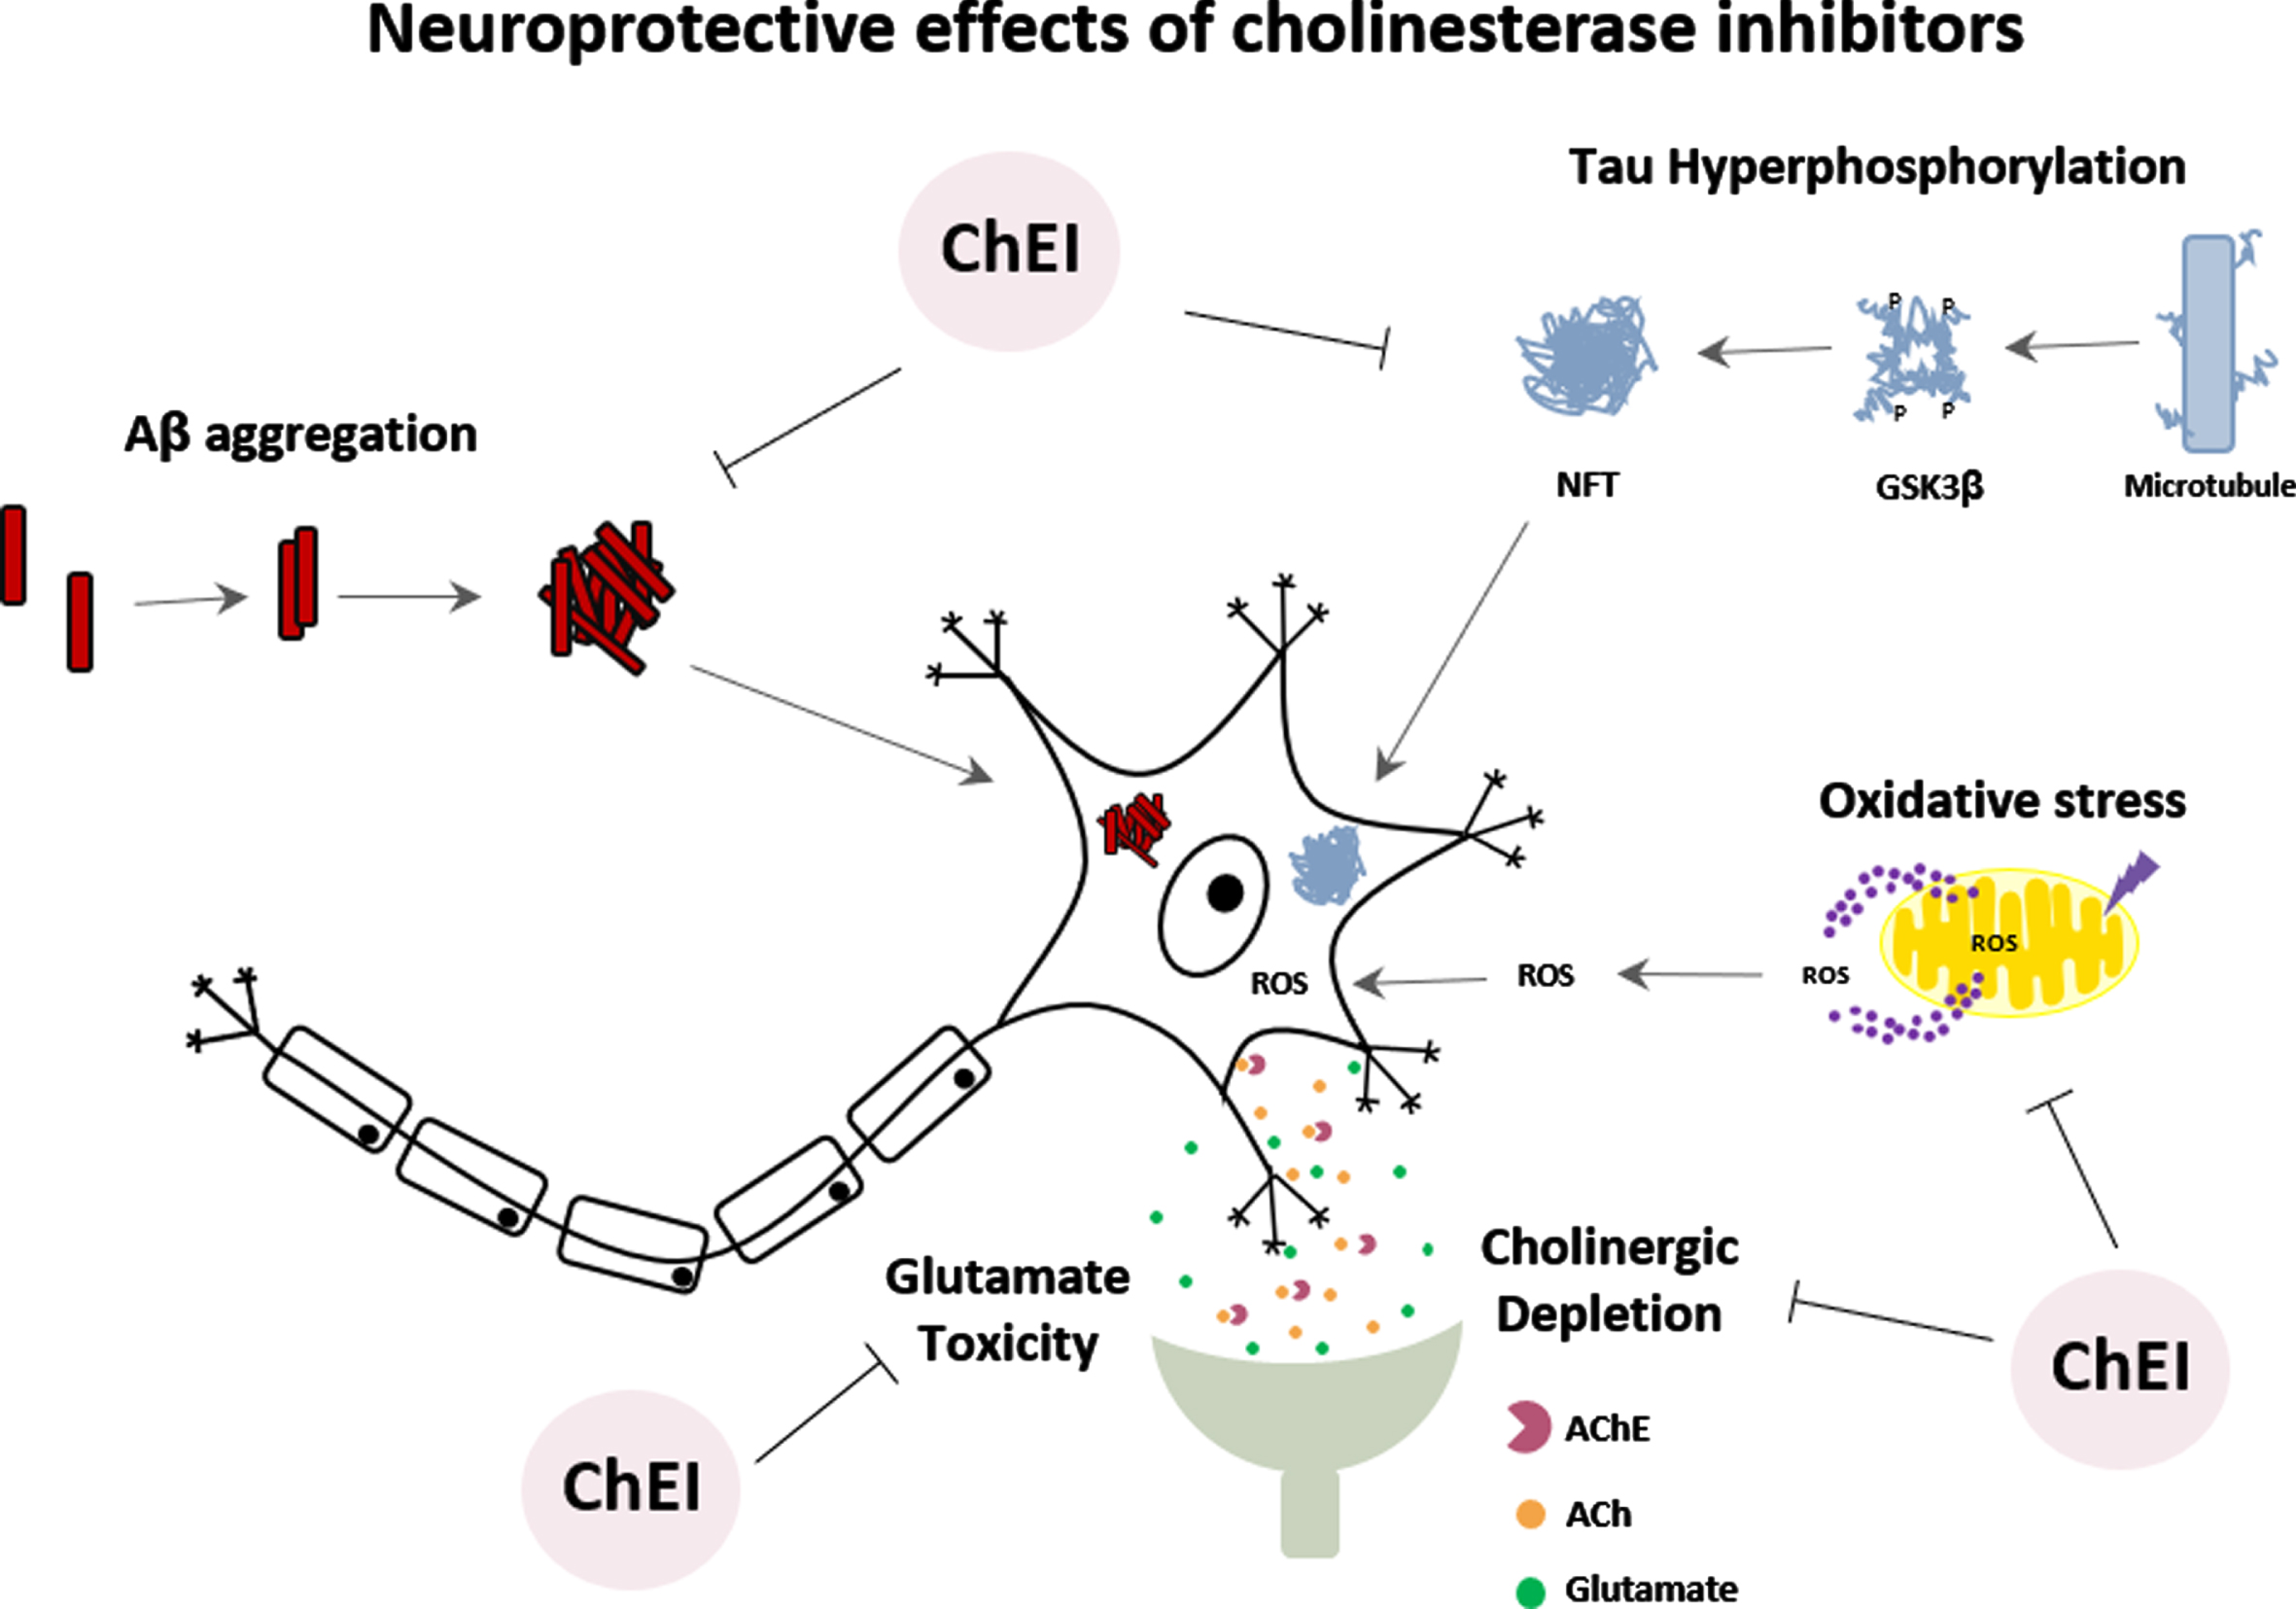 Multi-target effects of cholinesterase inhibitors on different pathways involved in the development of Alzheimer’s disease.